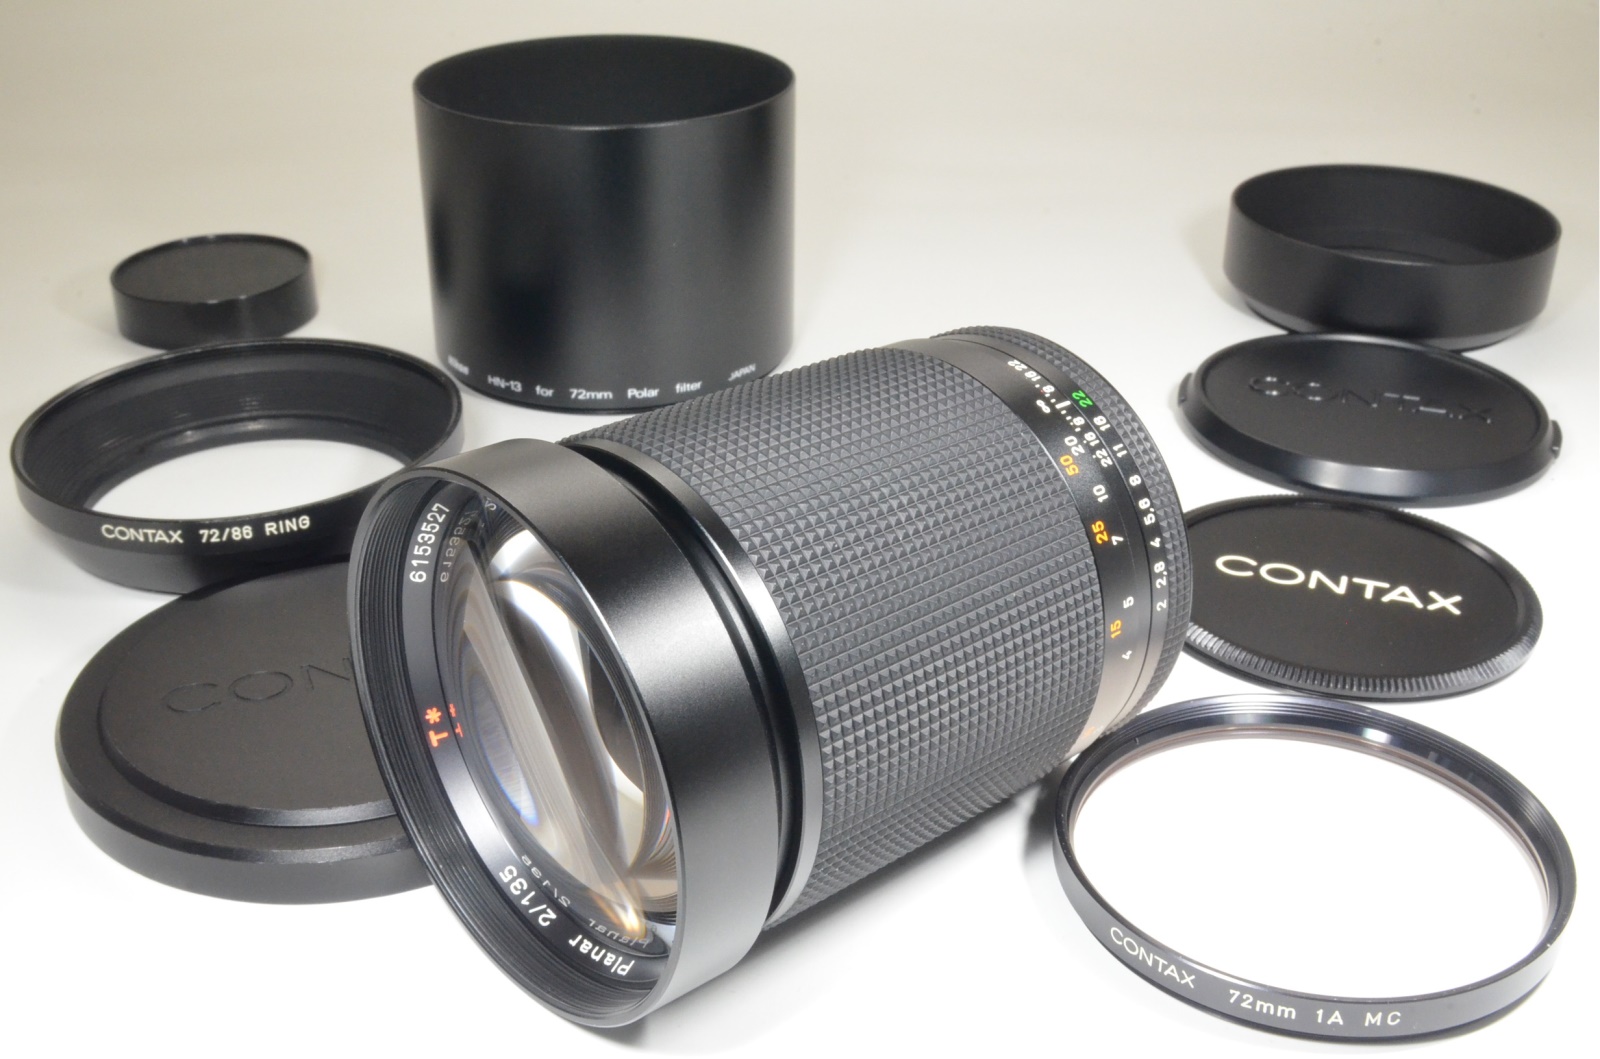 CONTAX Carl Zeiss Planar T* 135mm f2 MMG West Germany with 2 Lens 